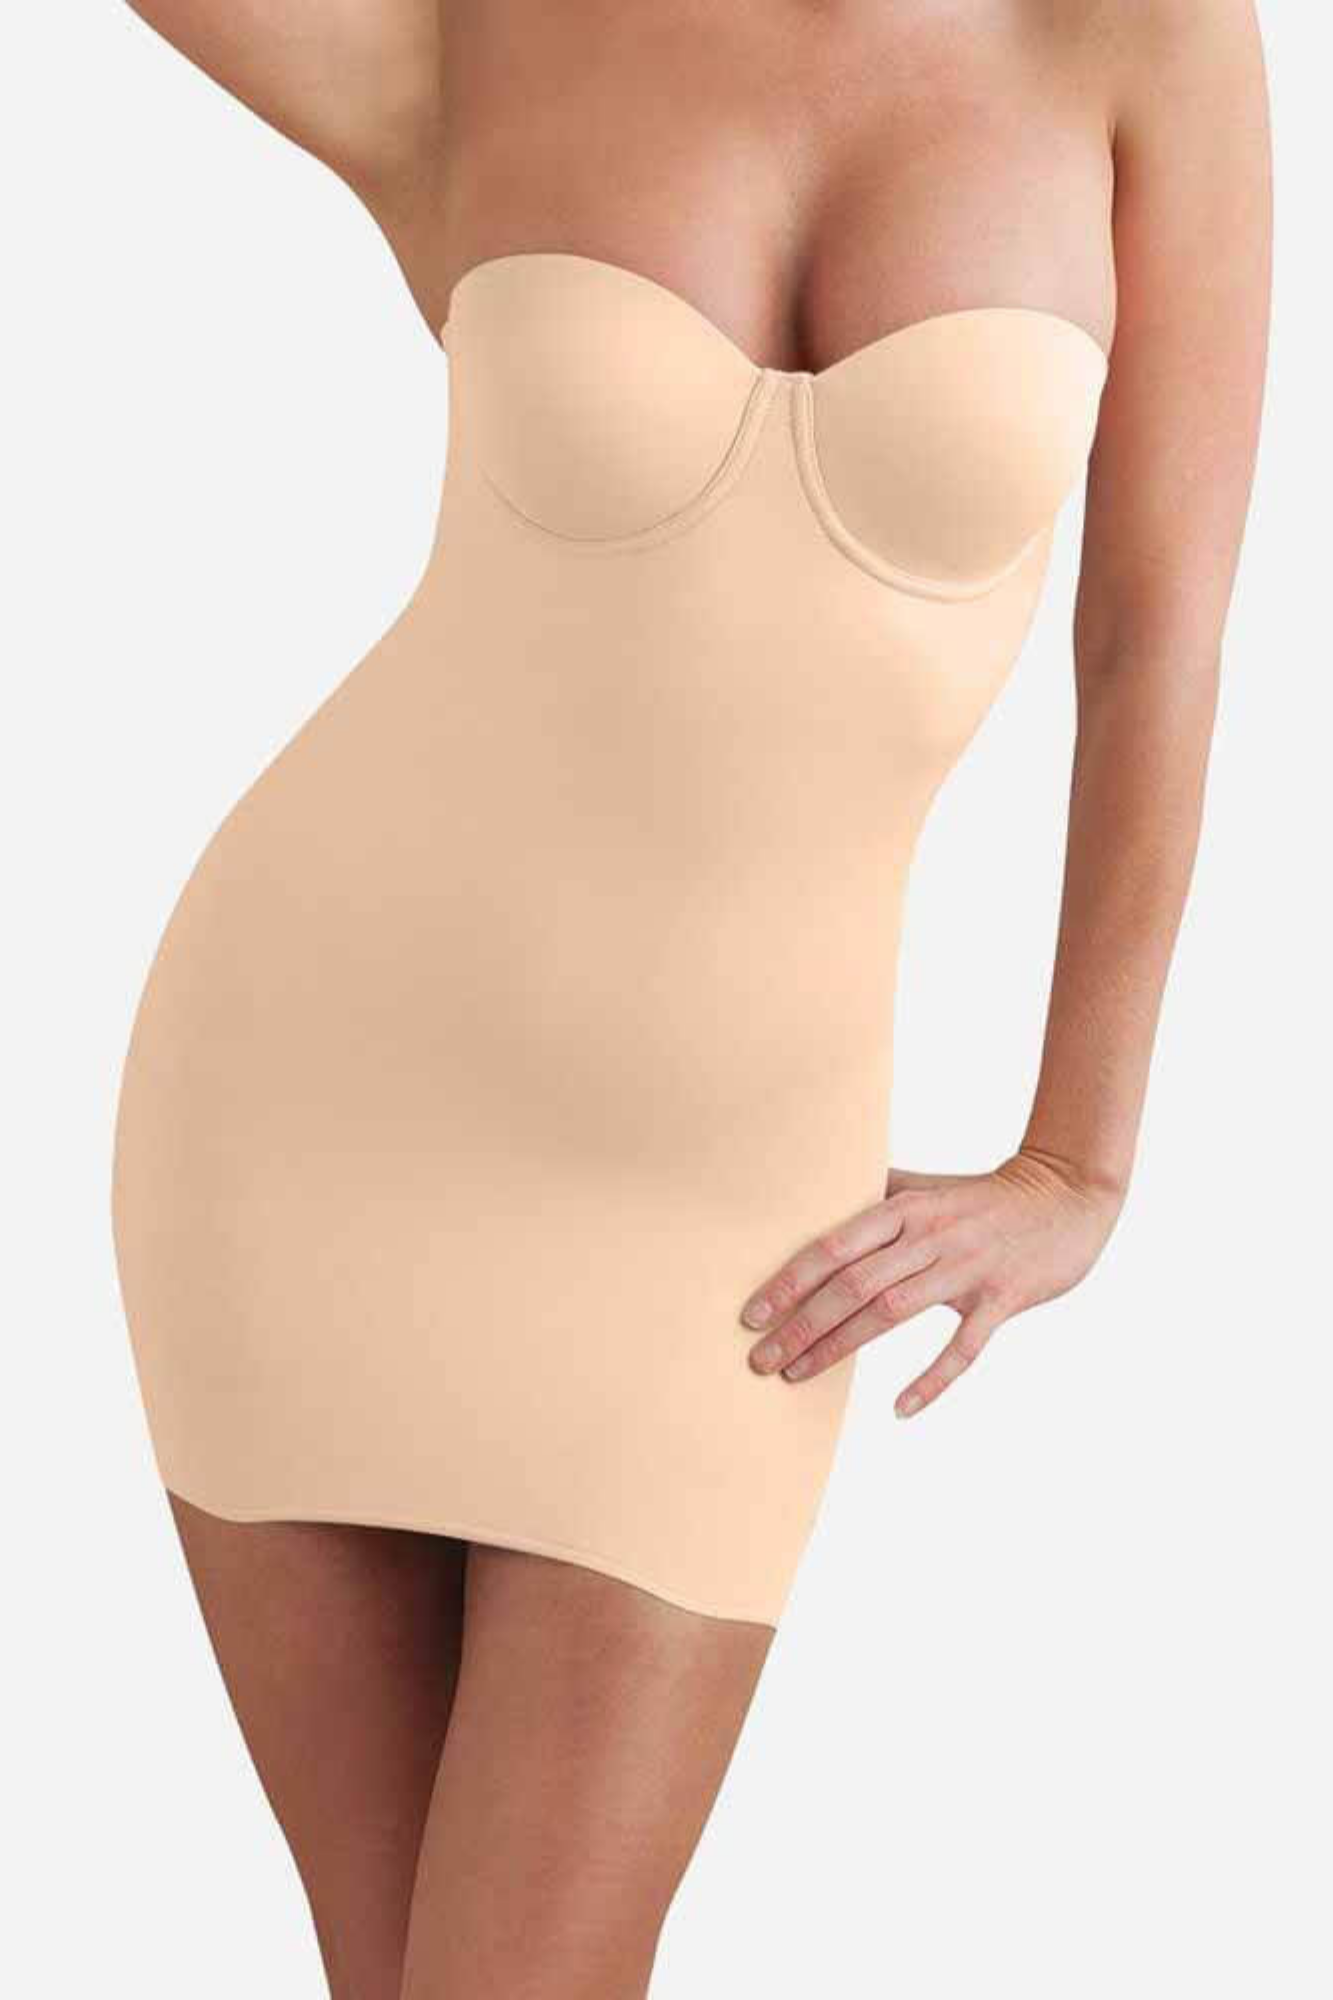 Get the Perfect Figure with Miracle Suit TC Shapewear at Petticoat